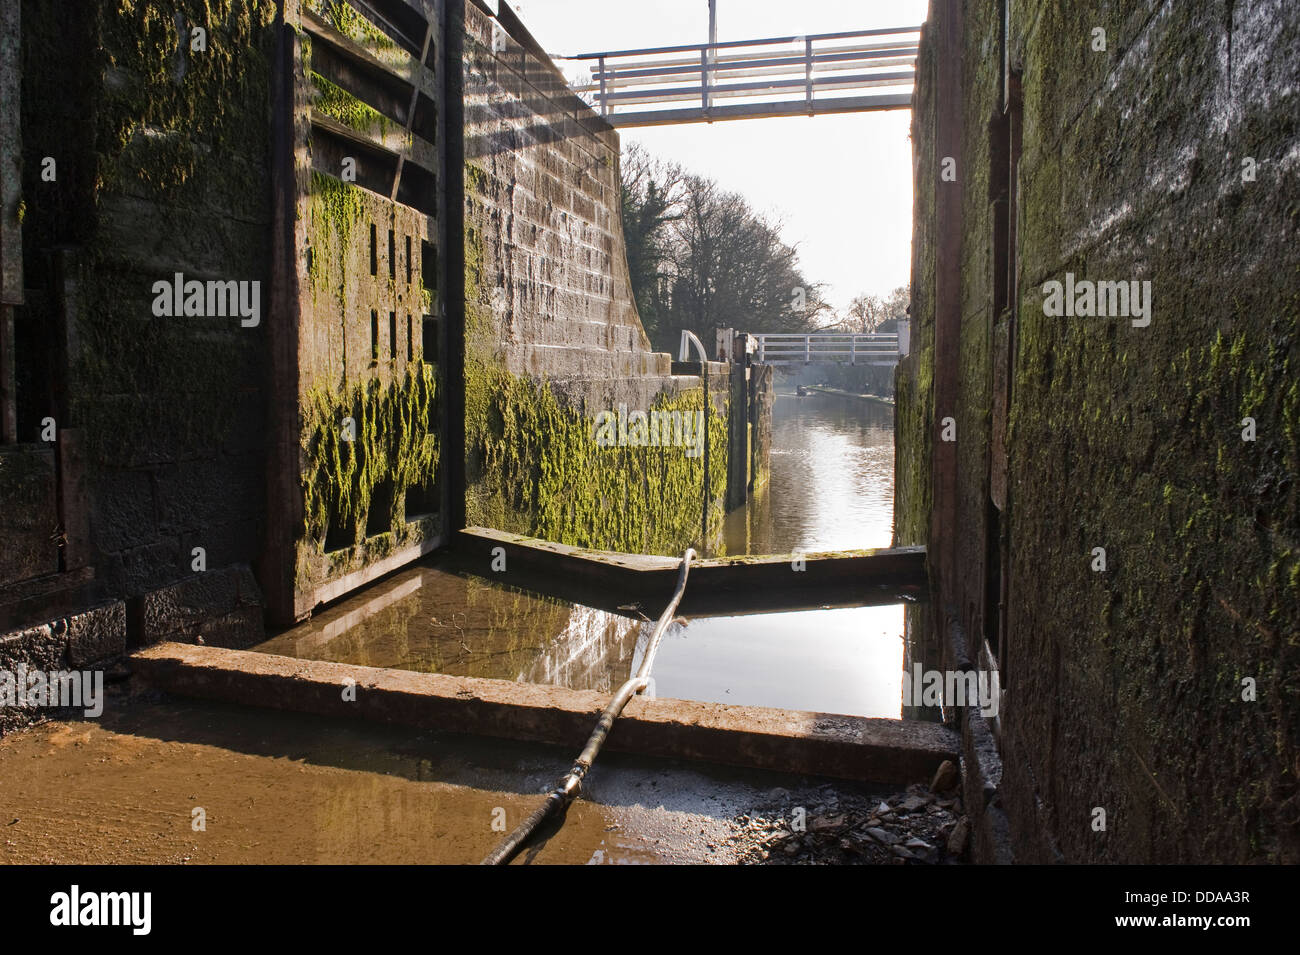 View from drained bottom lock chamber through open gates to canal - Five Rise Locks closed for renovation, Leeds Liverpool Canal, Bingley, England, UK Stock Photo